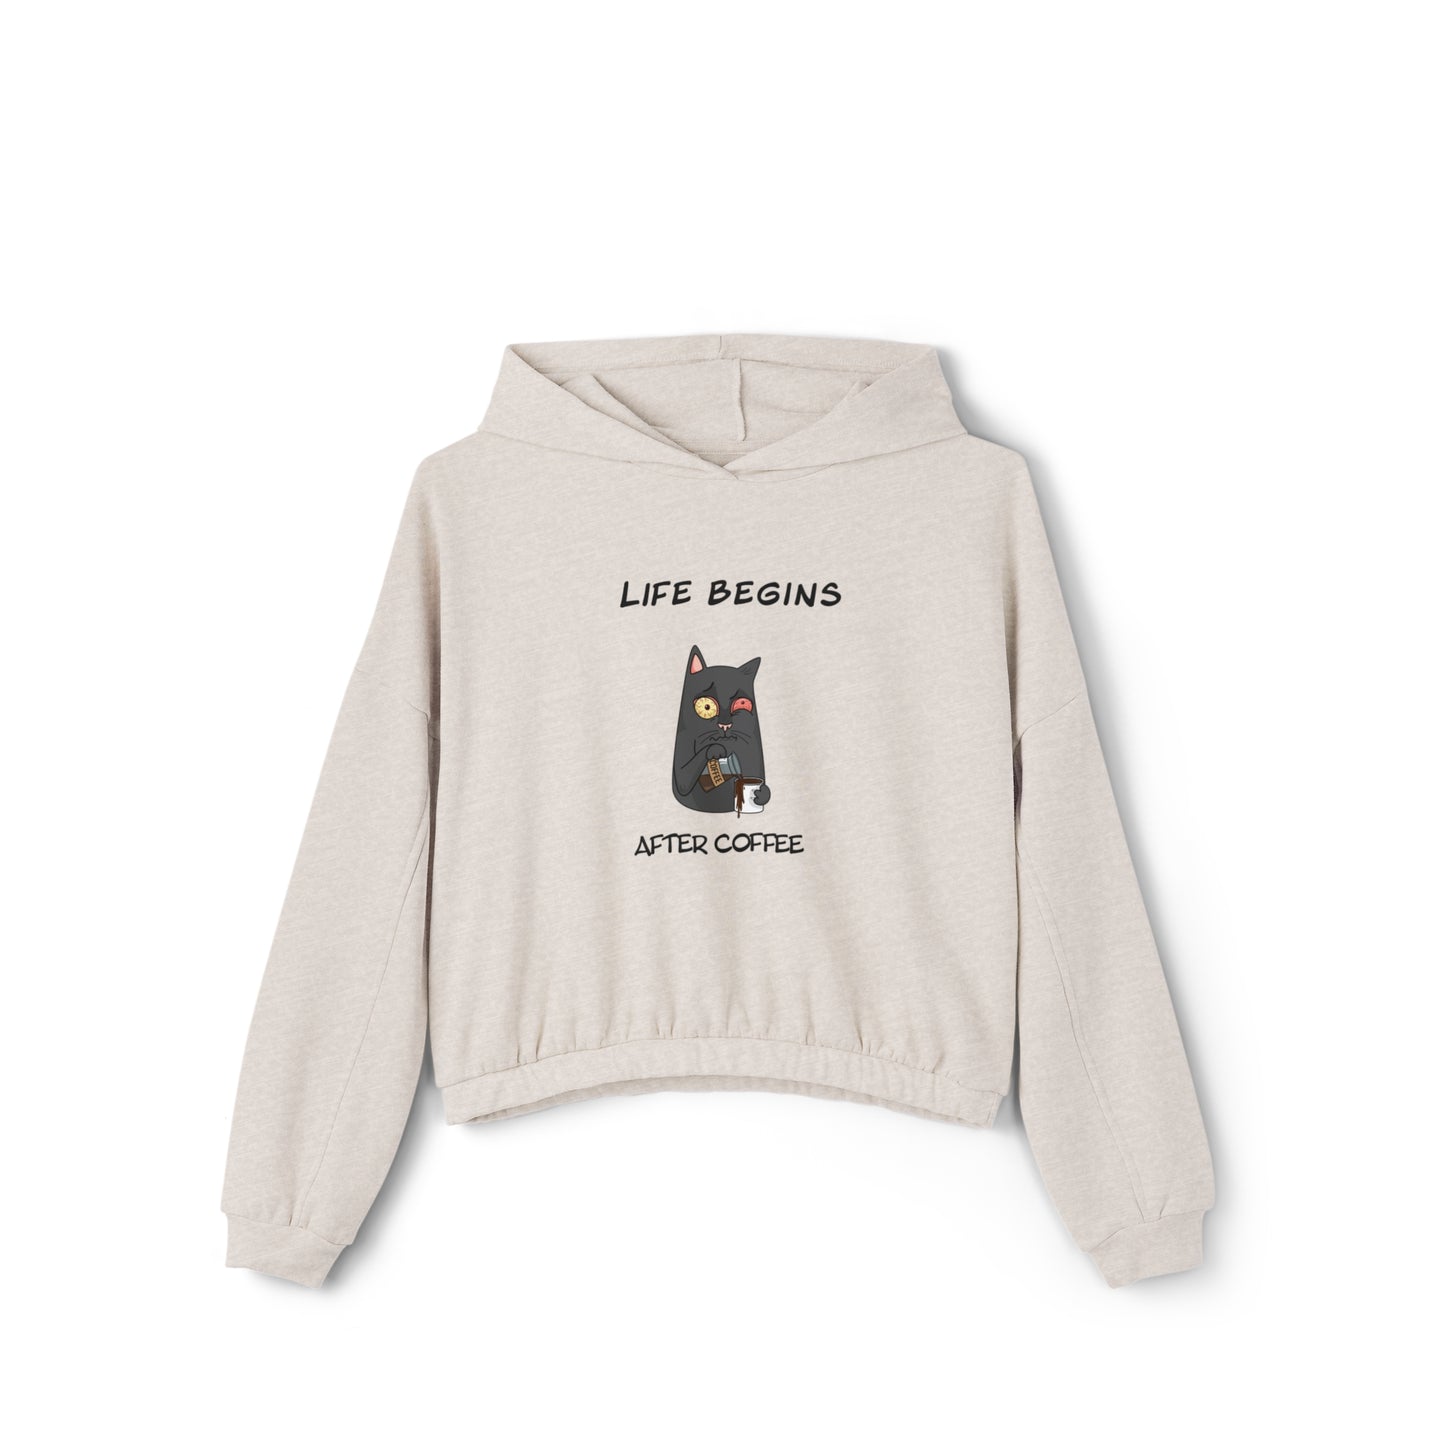 Luna The Cat. Life Begins After Coffee. Women's Cinched Bottom Hoodie